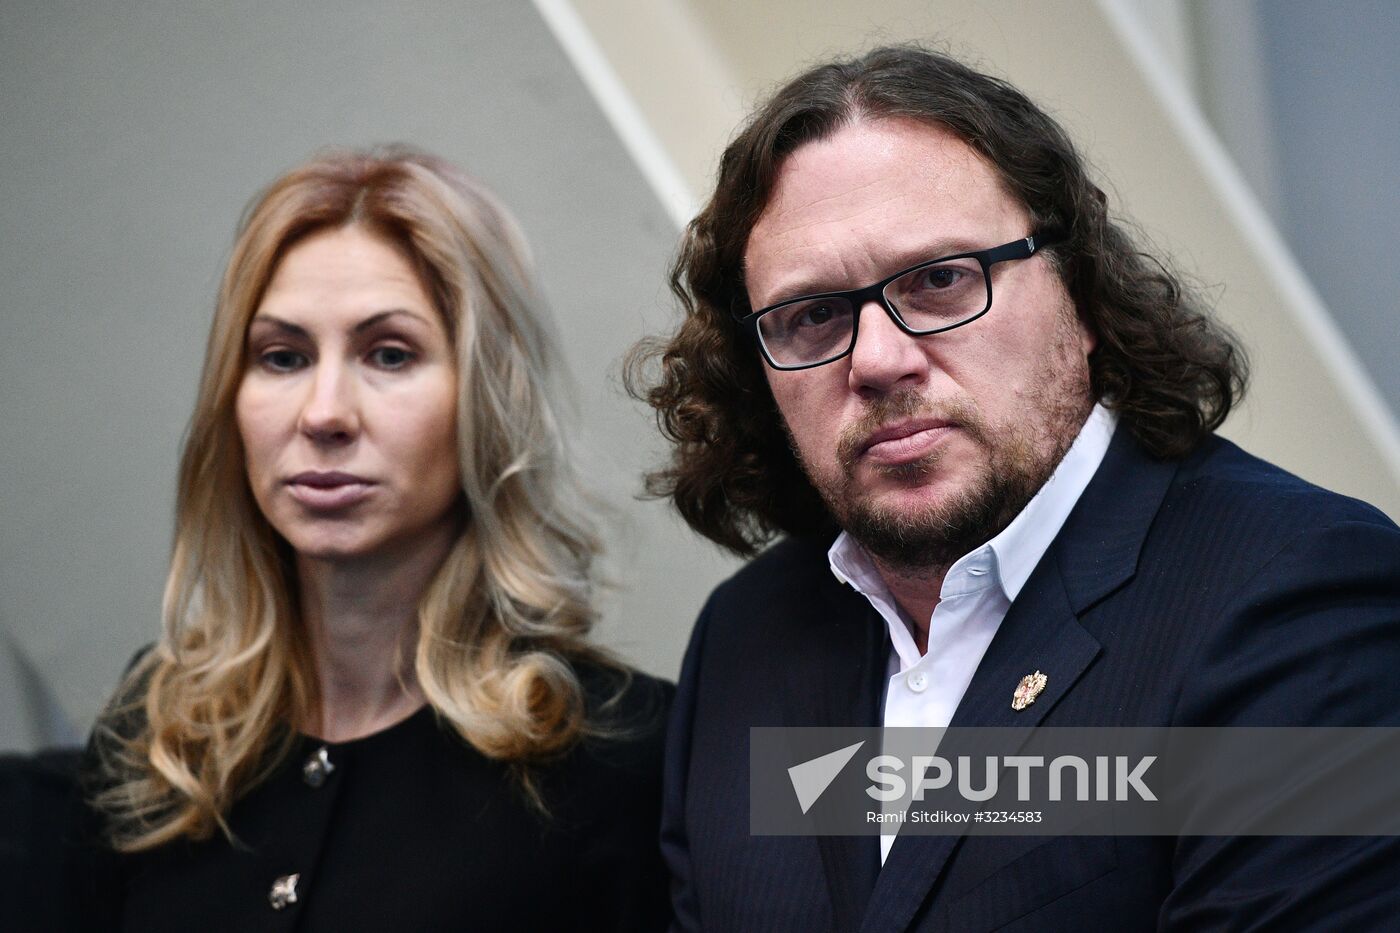 News conference with Sergei Polonsky